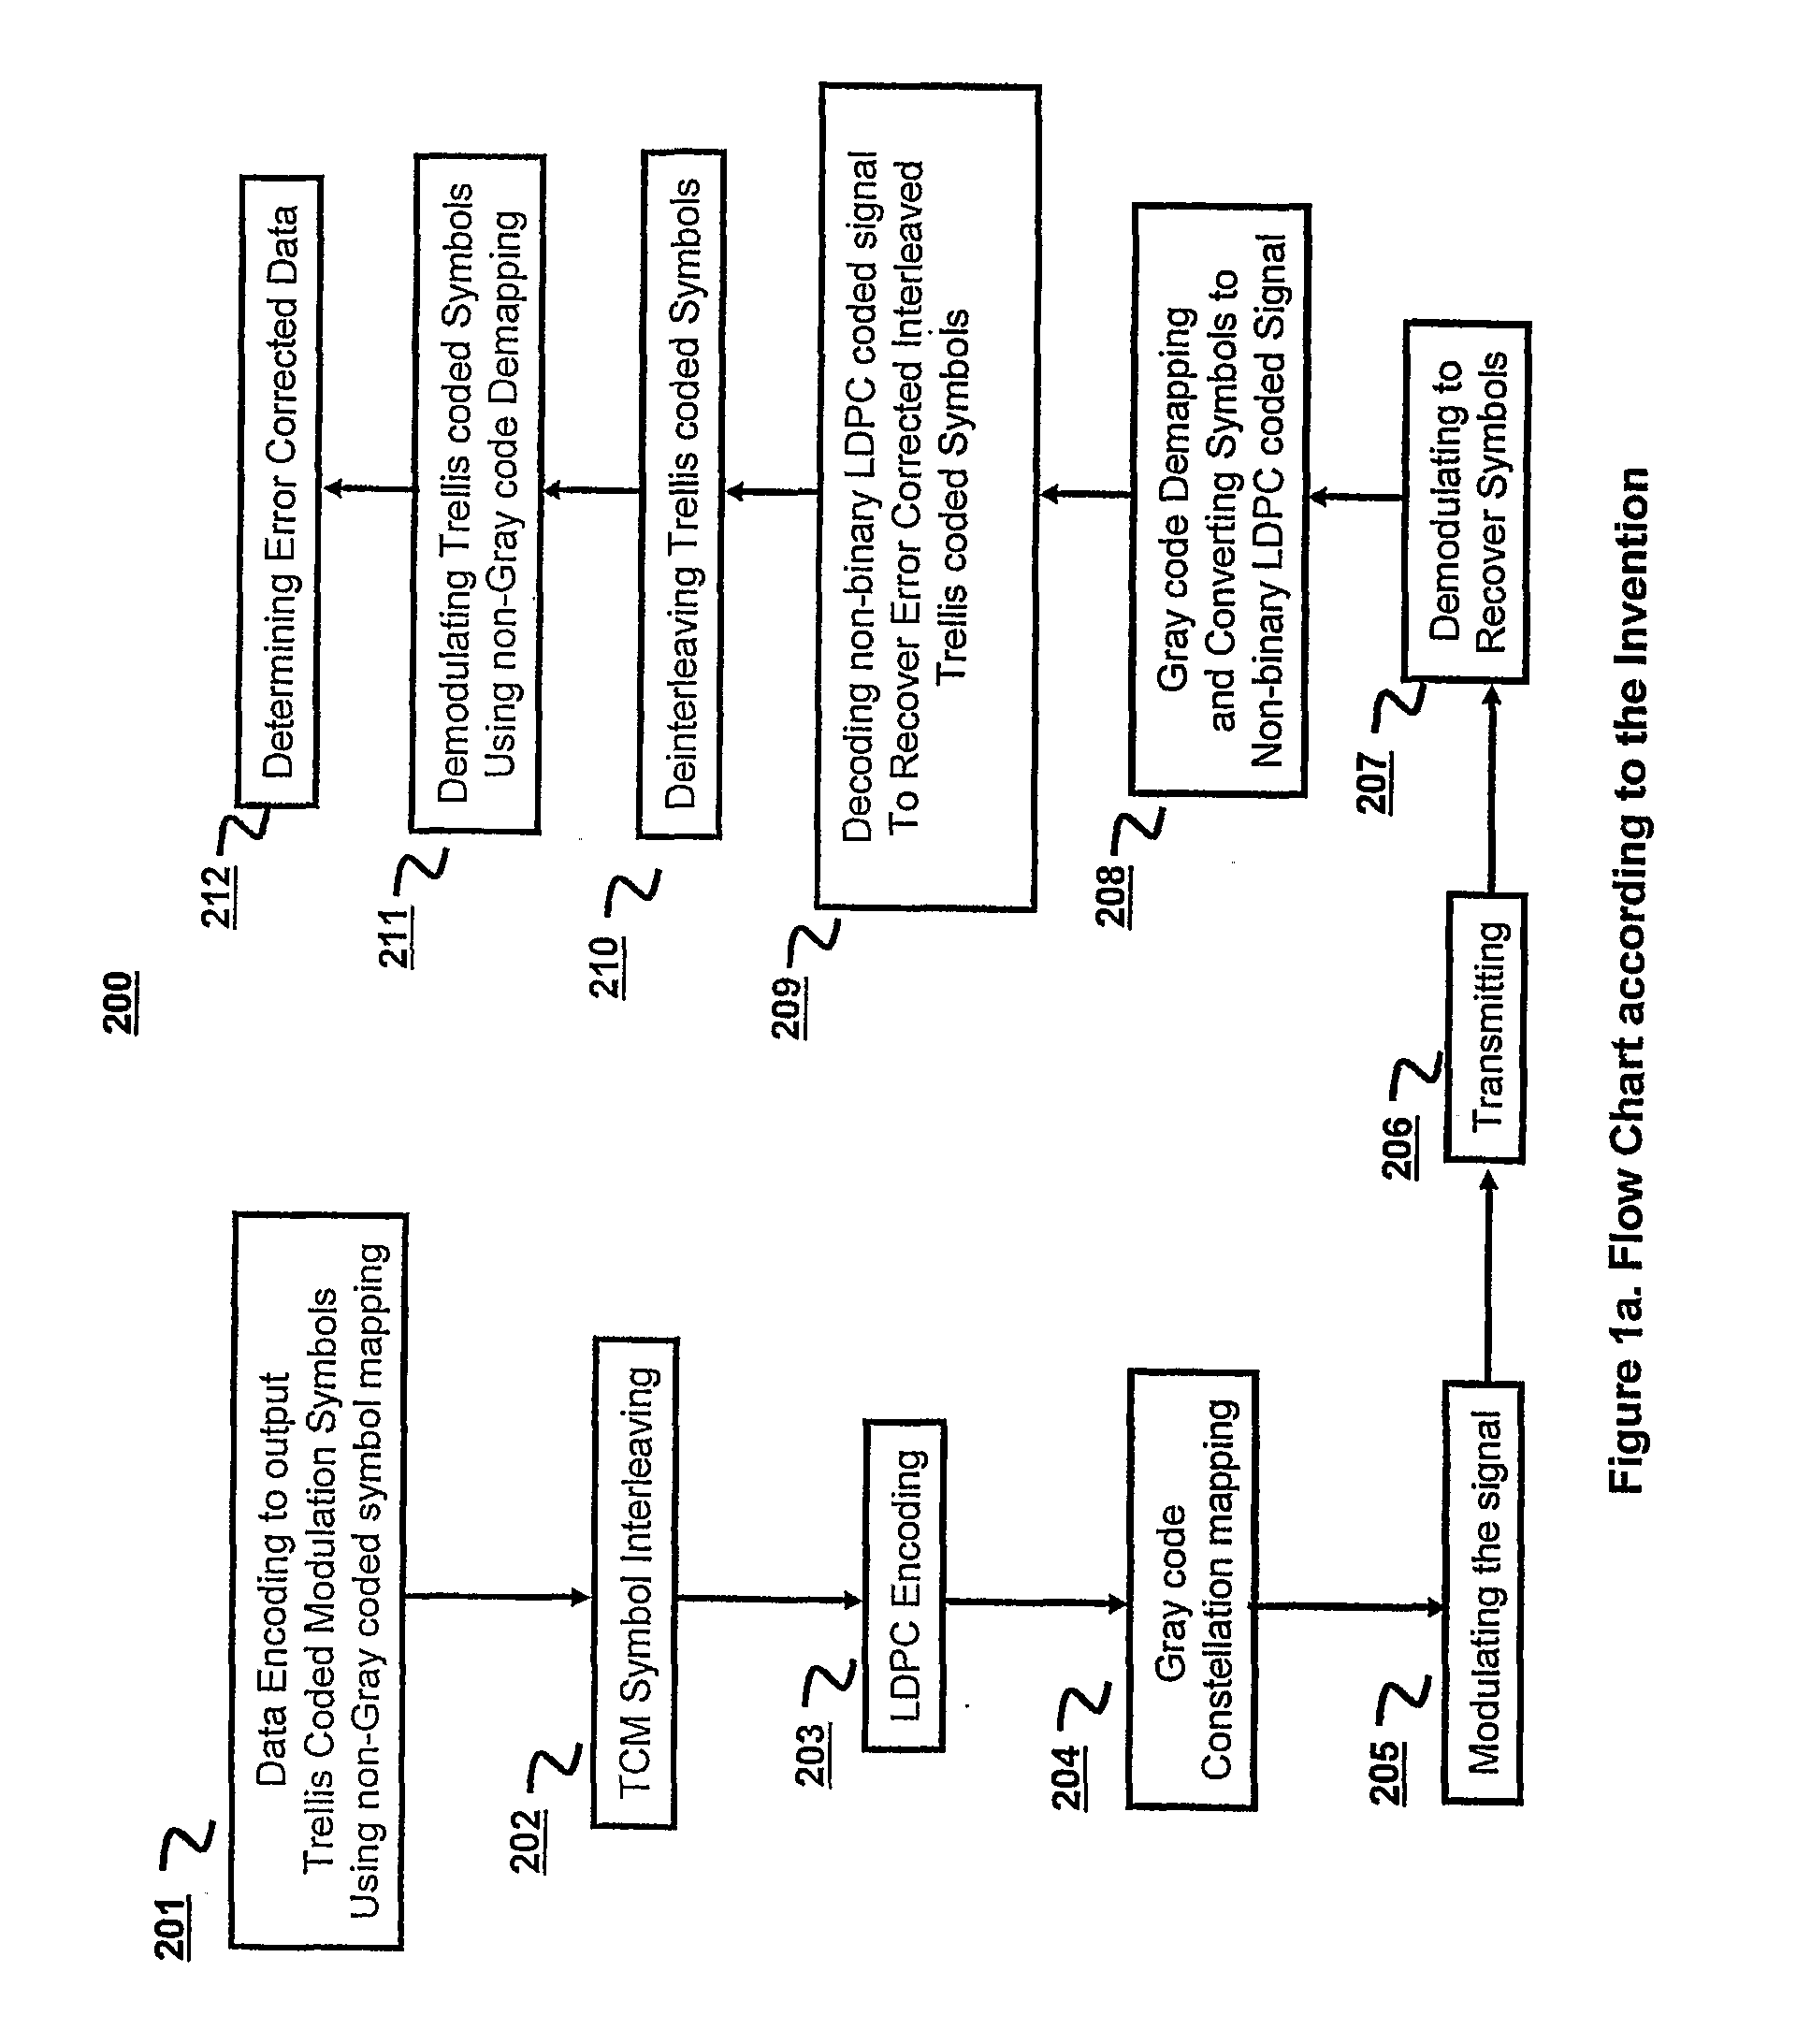 Serial concatenation of trelliscoded modulation and an inner non-binary LDPC code